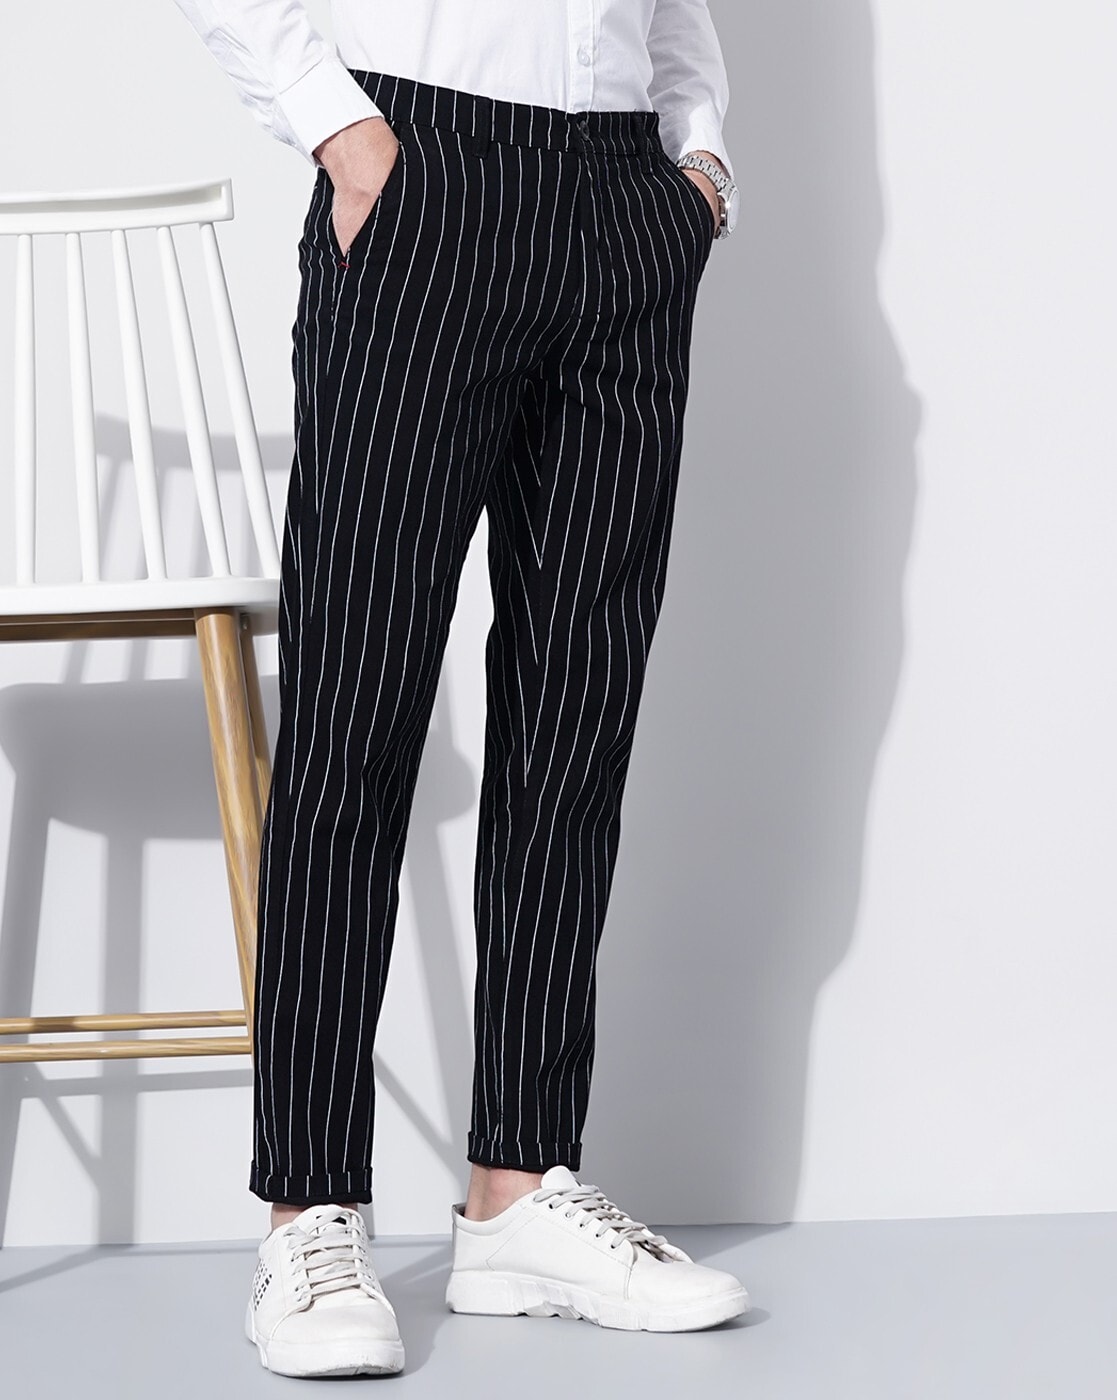 What color shirt goes well with black and white striped pants? - Quora